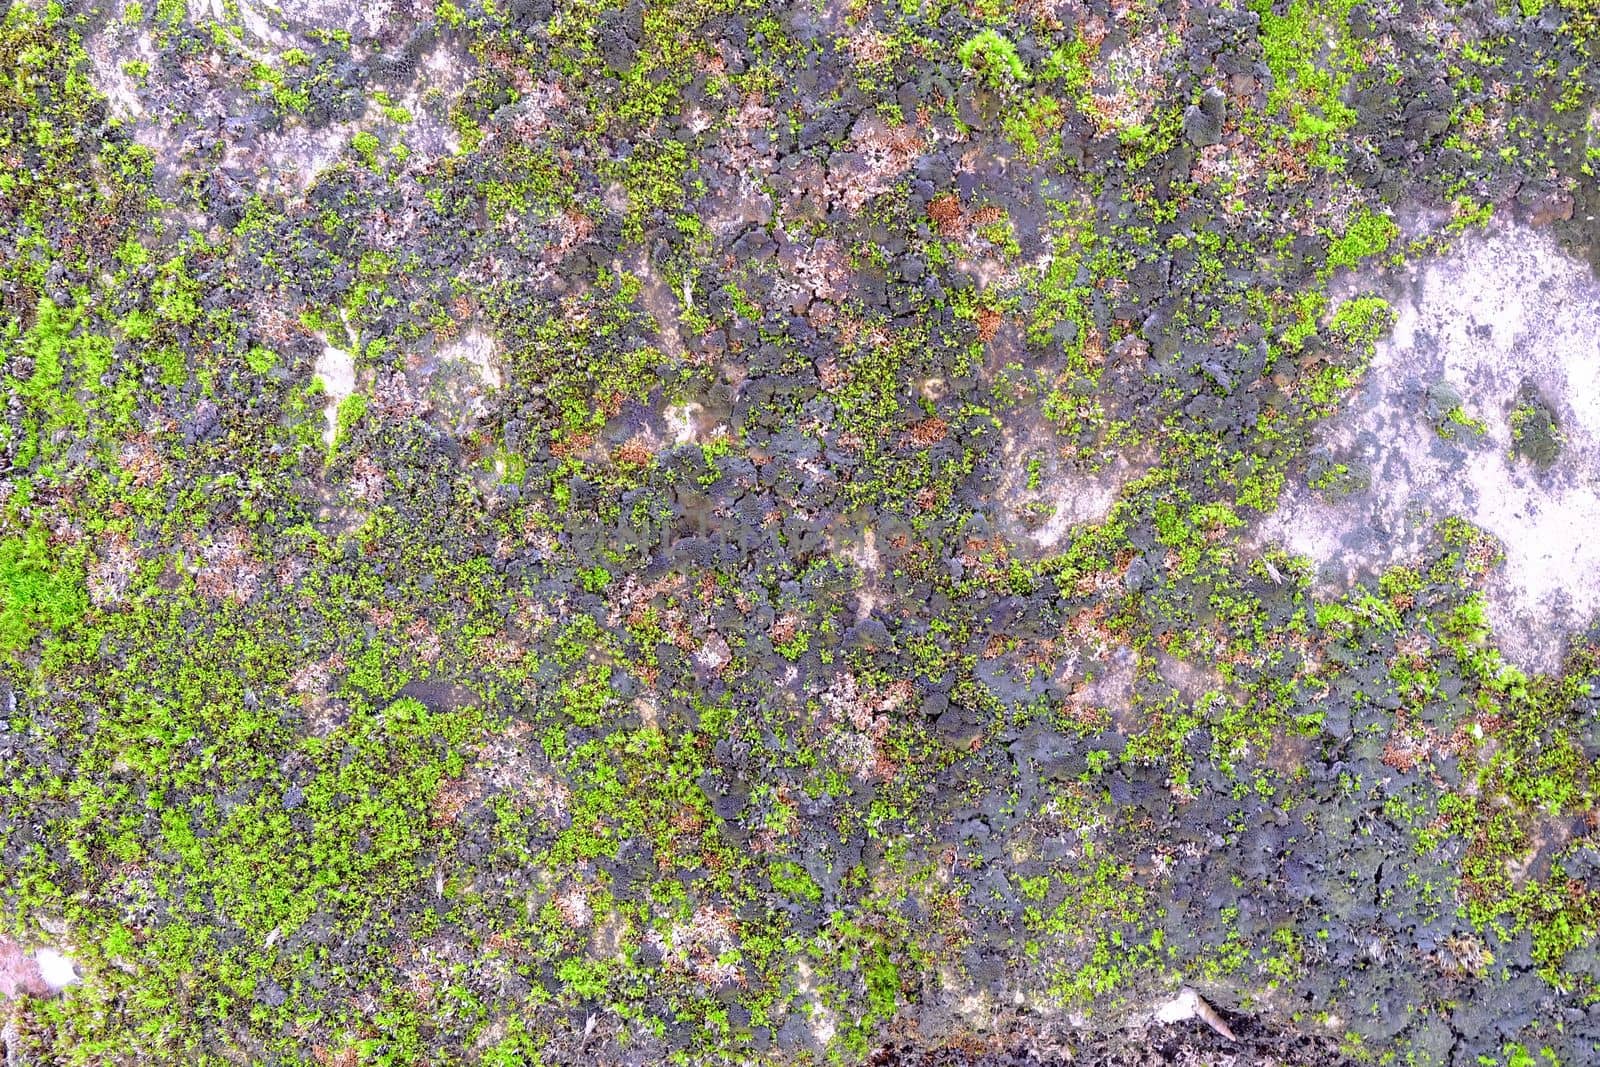 Ferns and Moss on Old Concrete Wall.